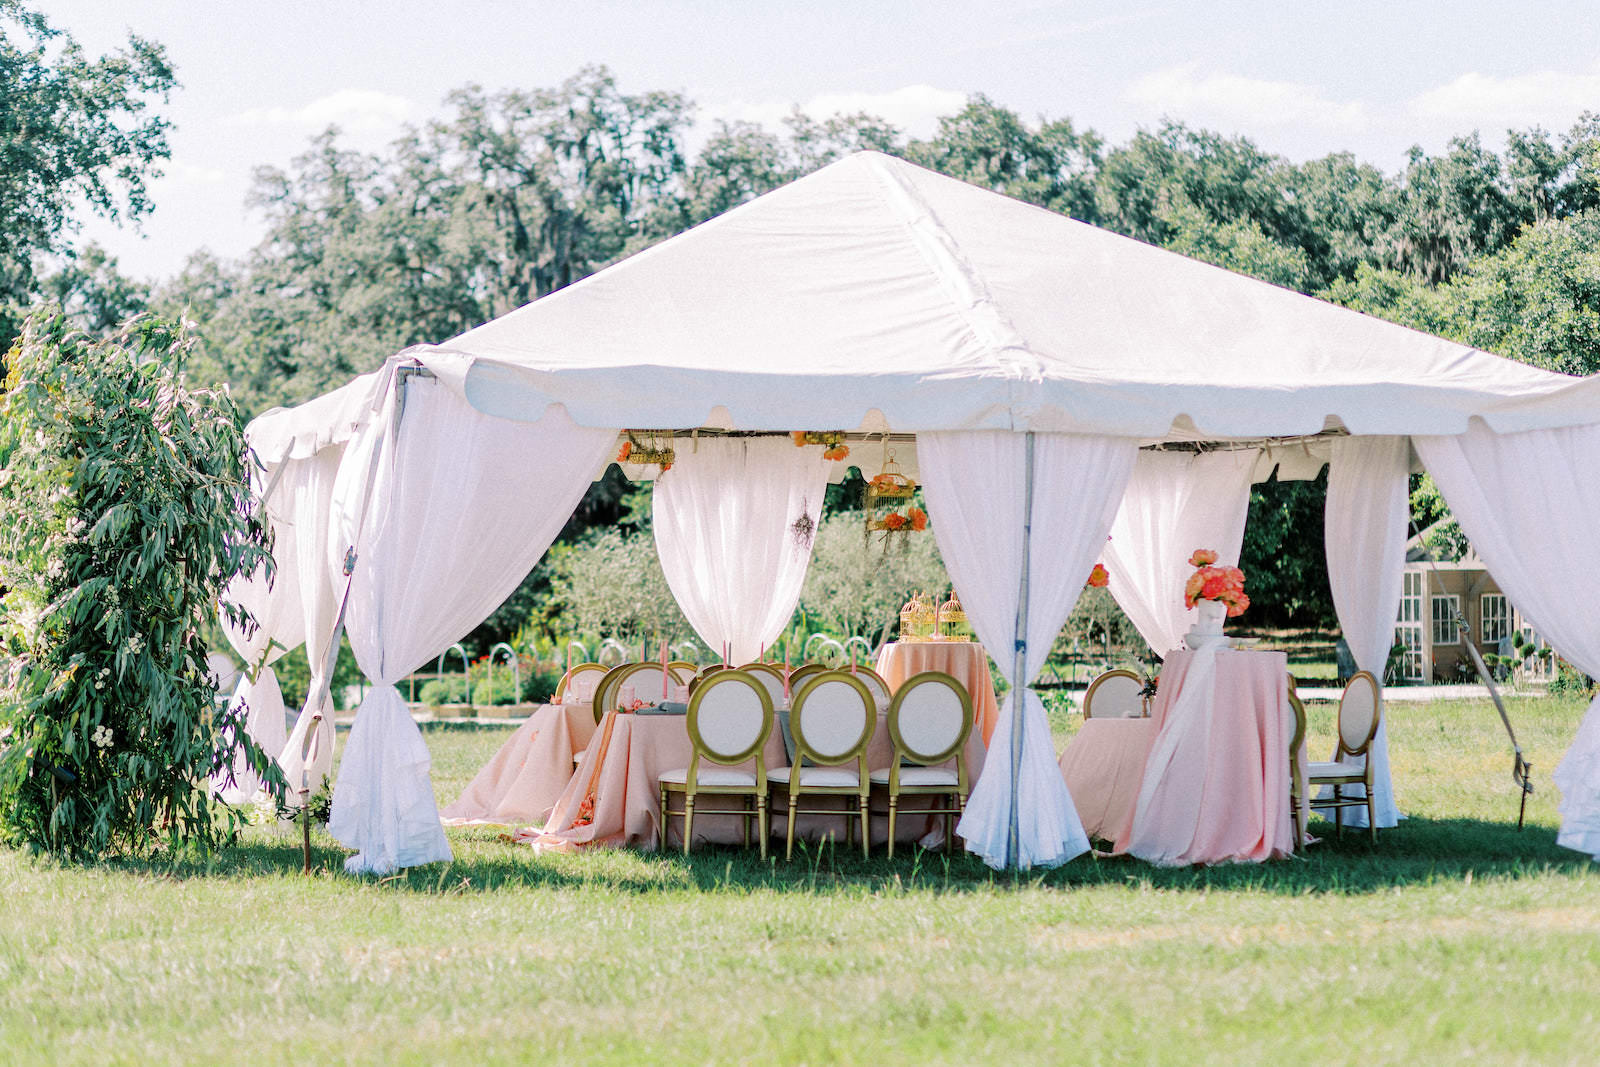 Garden Whimsical Wedding Decor, White Linen Tent, Tables with Pink Linens, White and Gold Louis Chairs | Tampa Bay Wedding Venue Millpond Estate | Wedding Chair Rental Kate Ryan Event Rental